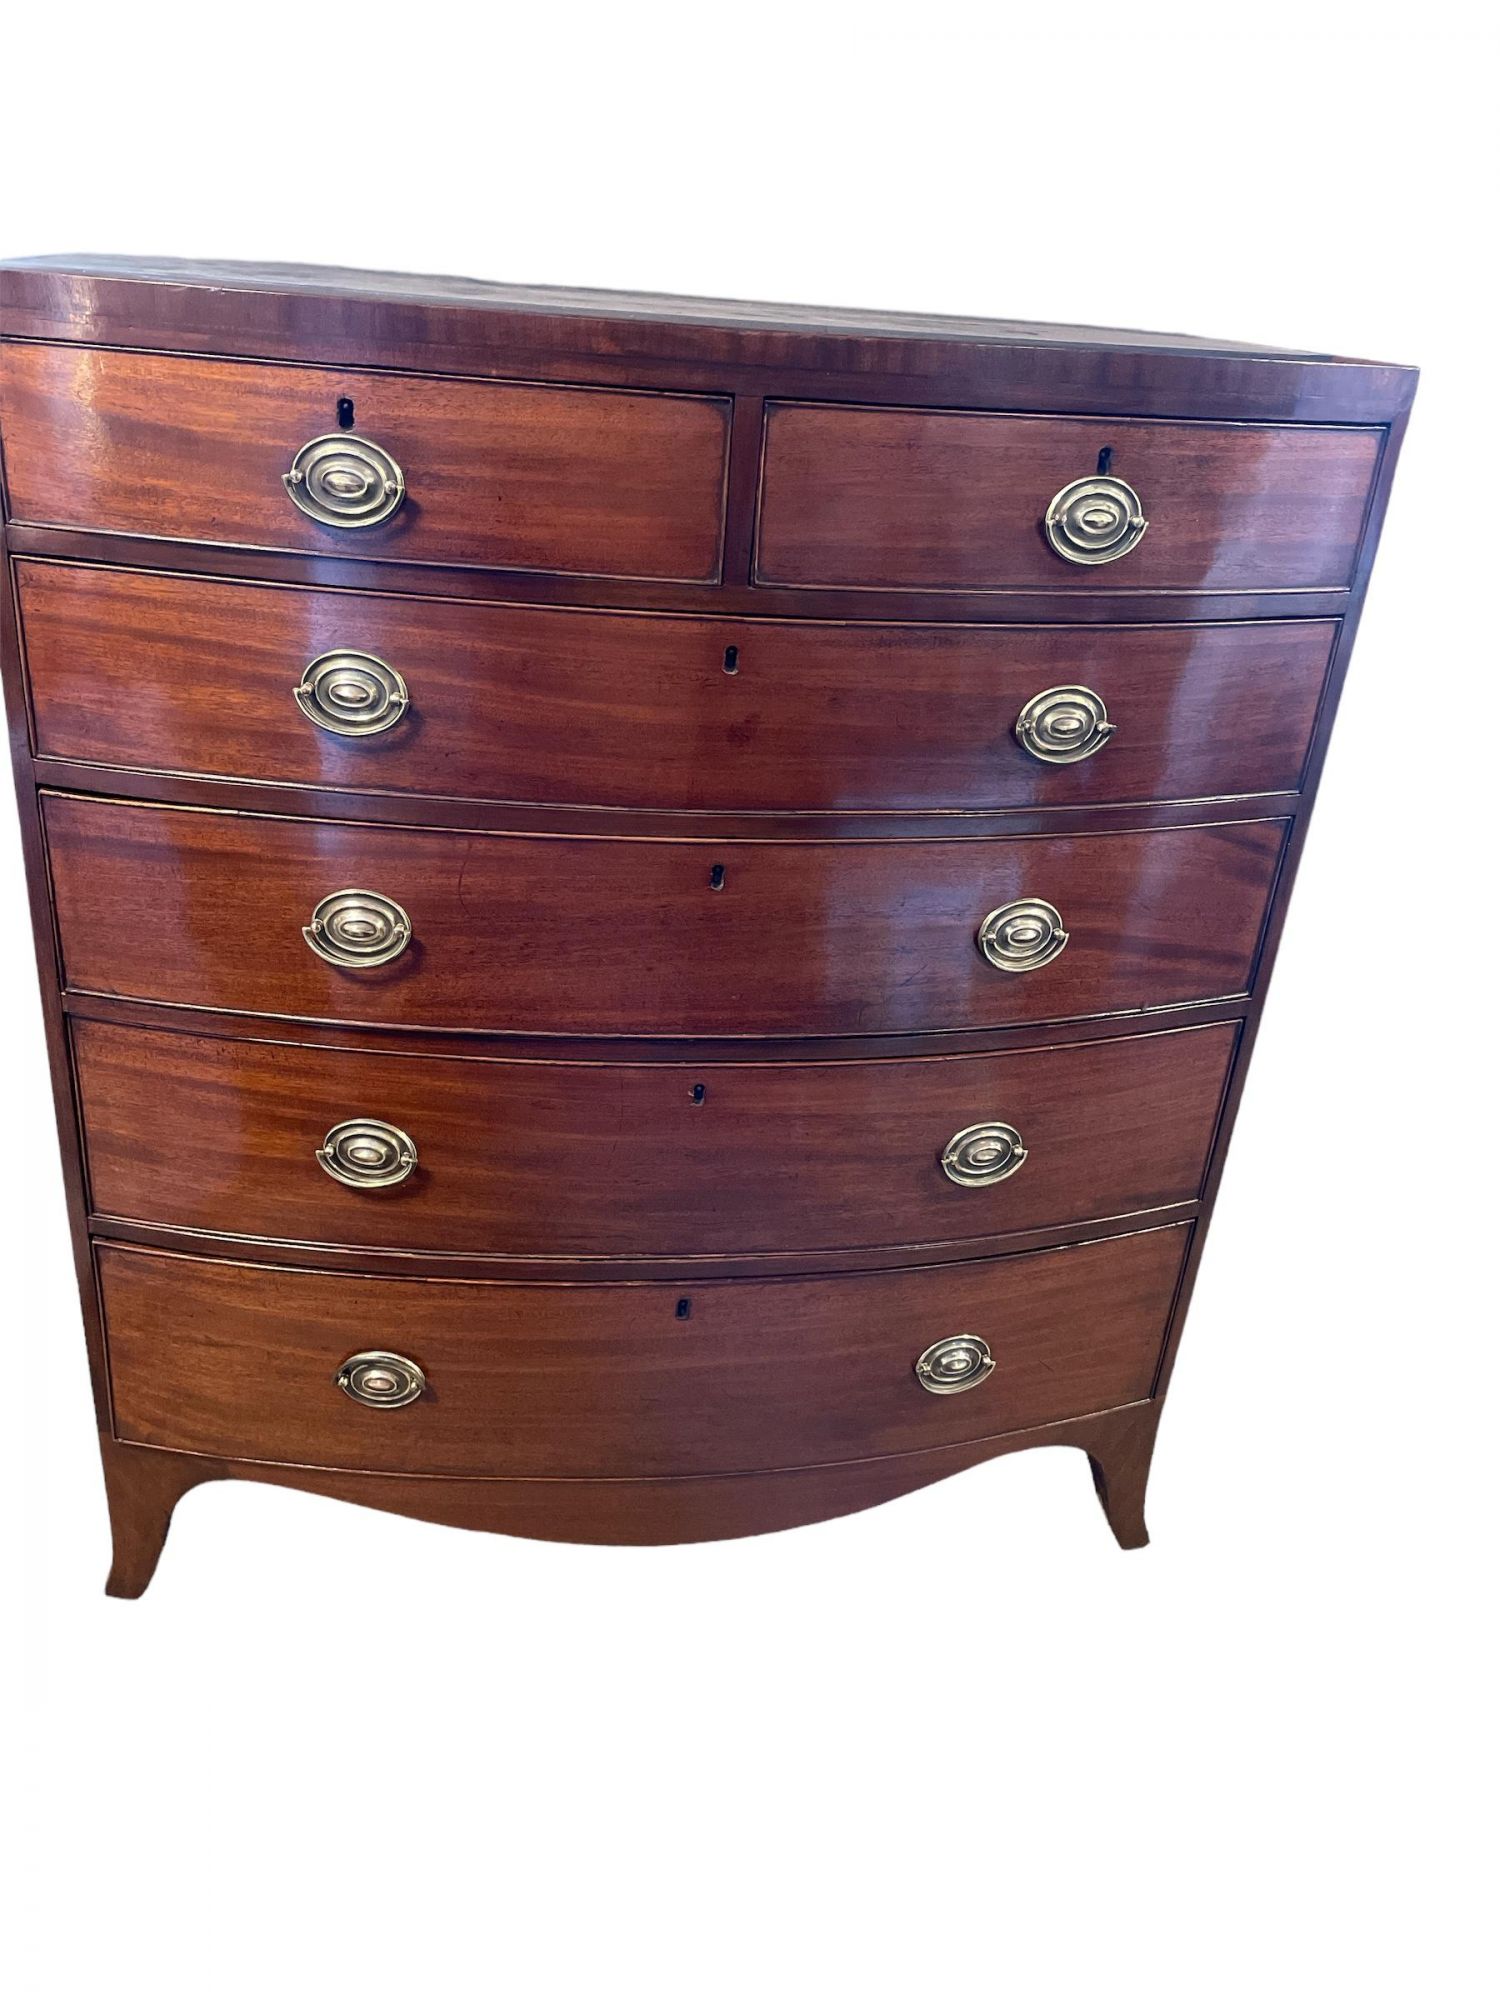 A Fine Flame Victorian Mahogany Bow Front Chest Of Drawers Antique Chest Of Drawers Hemswell